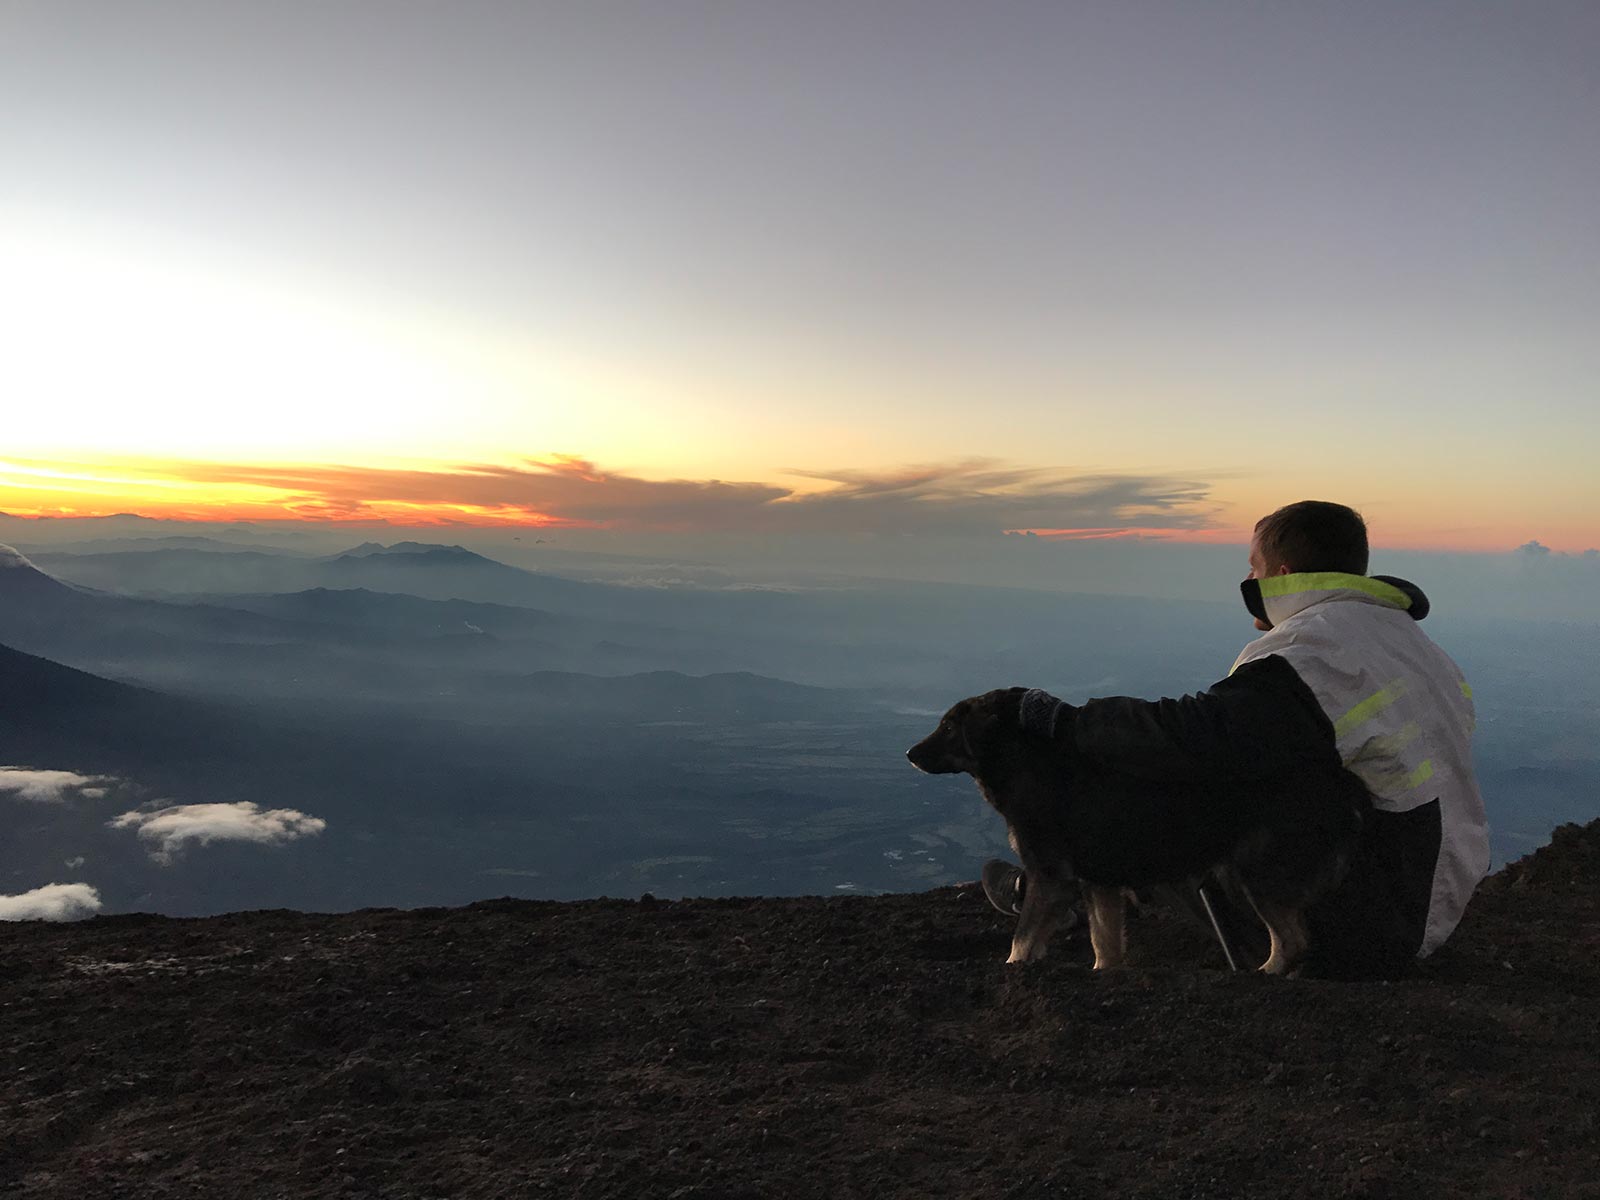 David Simpson and a friendly dog viewing sunrise above the clouds in Antigua, Guatemala. Volcano hiking in Guatemala